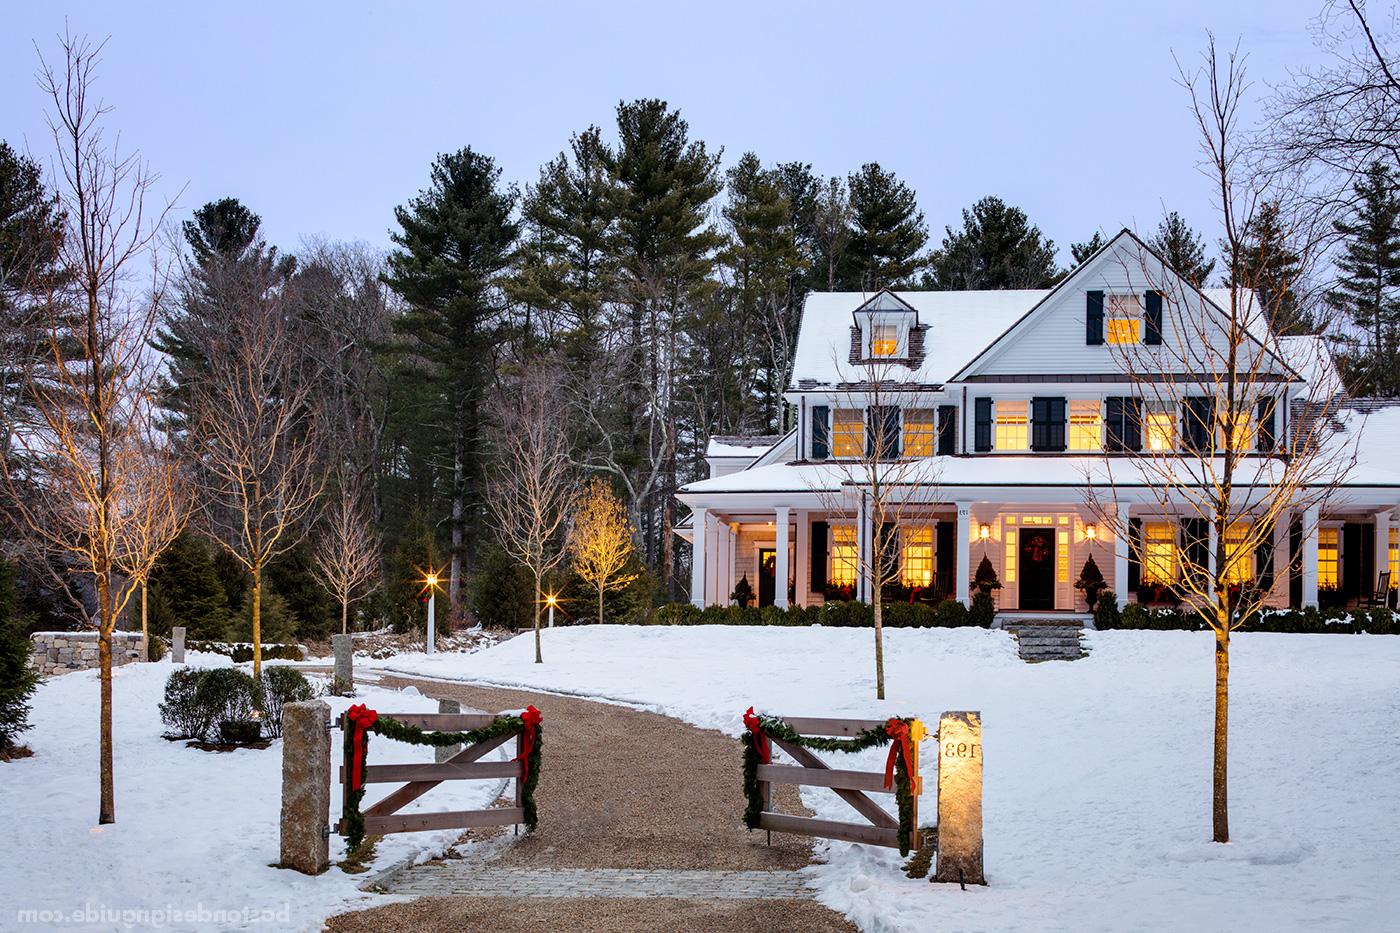 High-end traditional New England residence dressed for the holidays